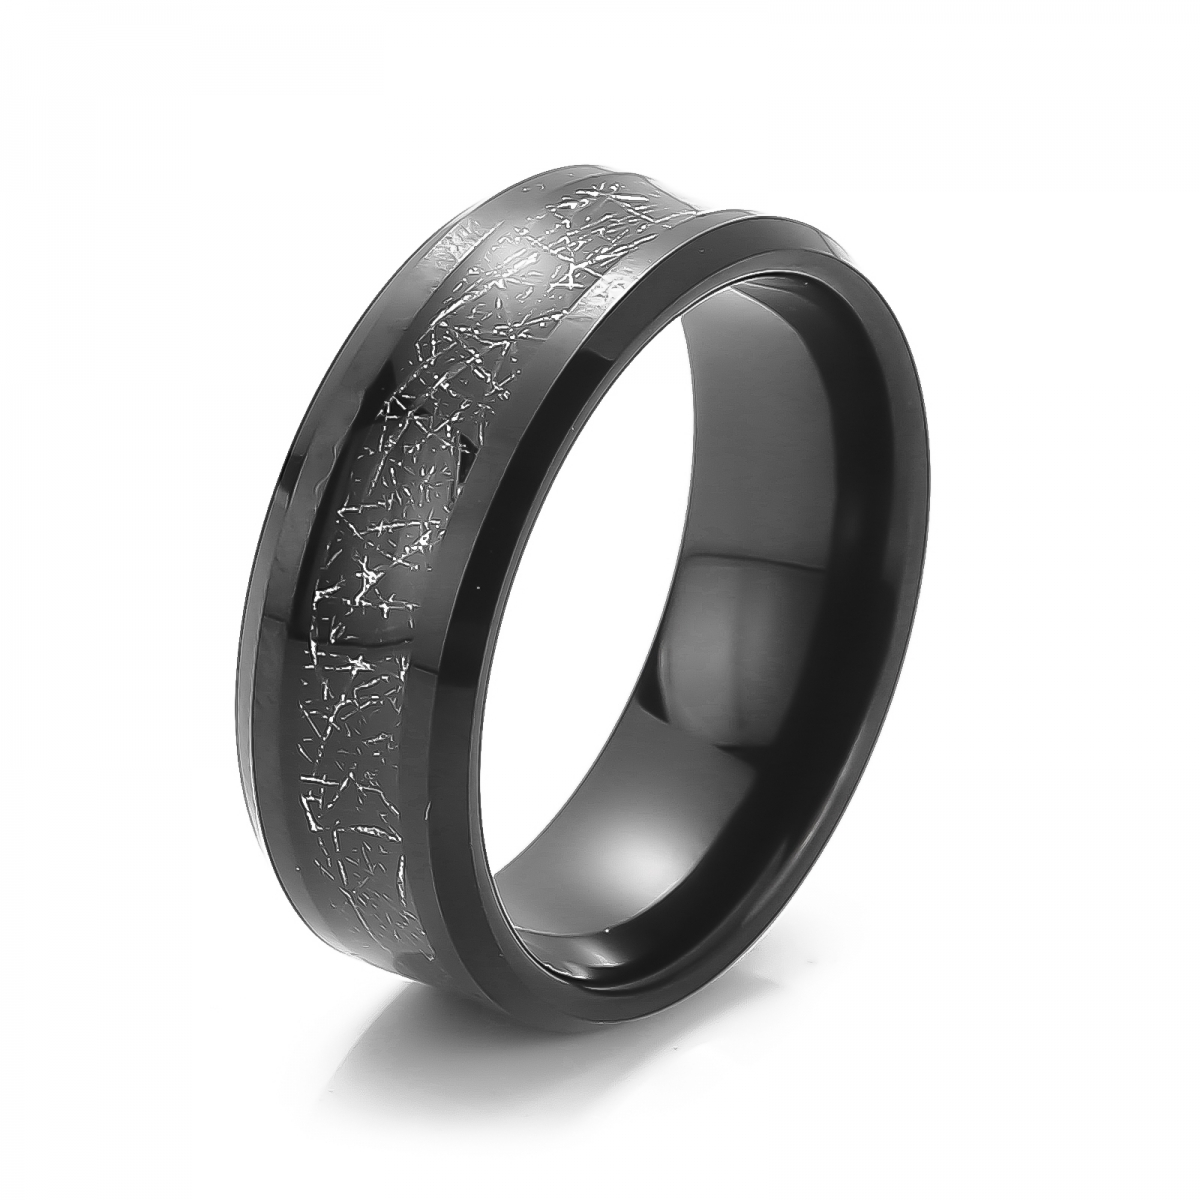 Tungsten Carbide Ring US$5.4/PC-NORSECOLLECTION- Viking Jewelry,Viking Necklace,Viking Bracelet,Viking Rings,Viking Mugs,Viking Accessories,Viking Crafts